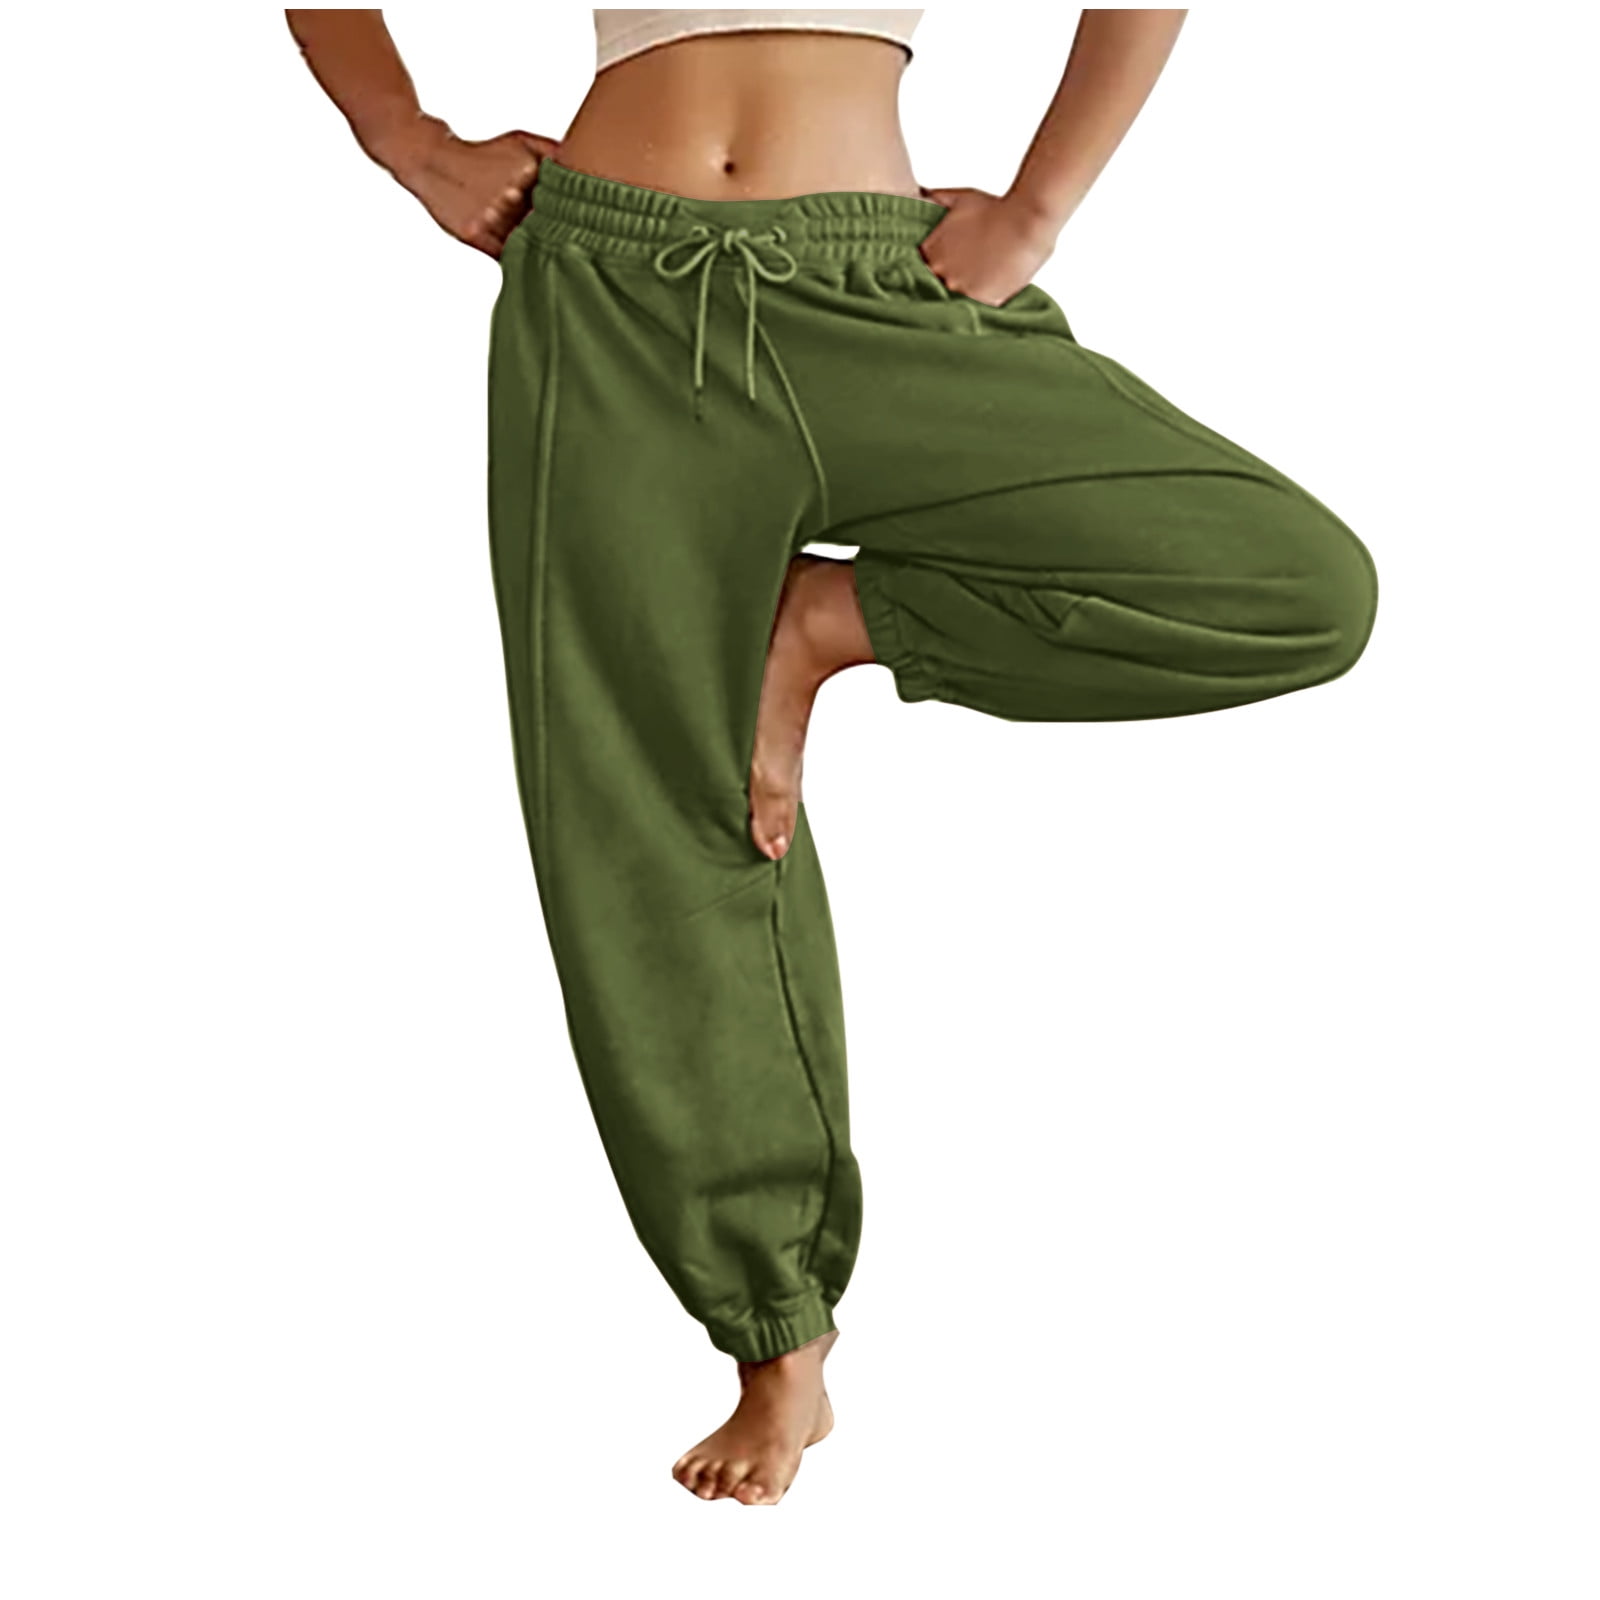 Dyegold Sweatpants For Tall Women Teen Girls Cargo Sweatpants For